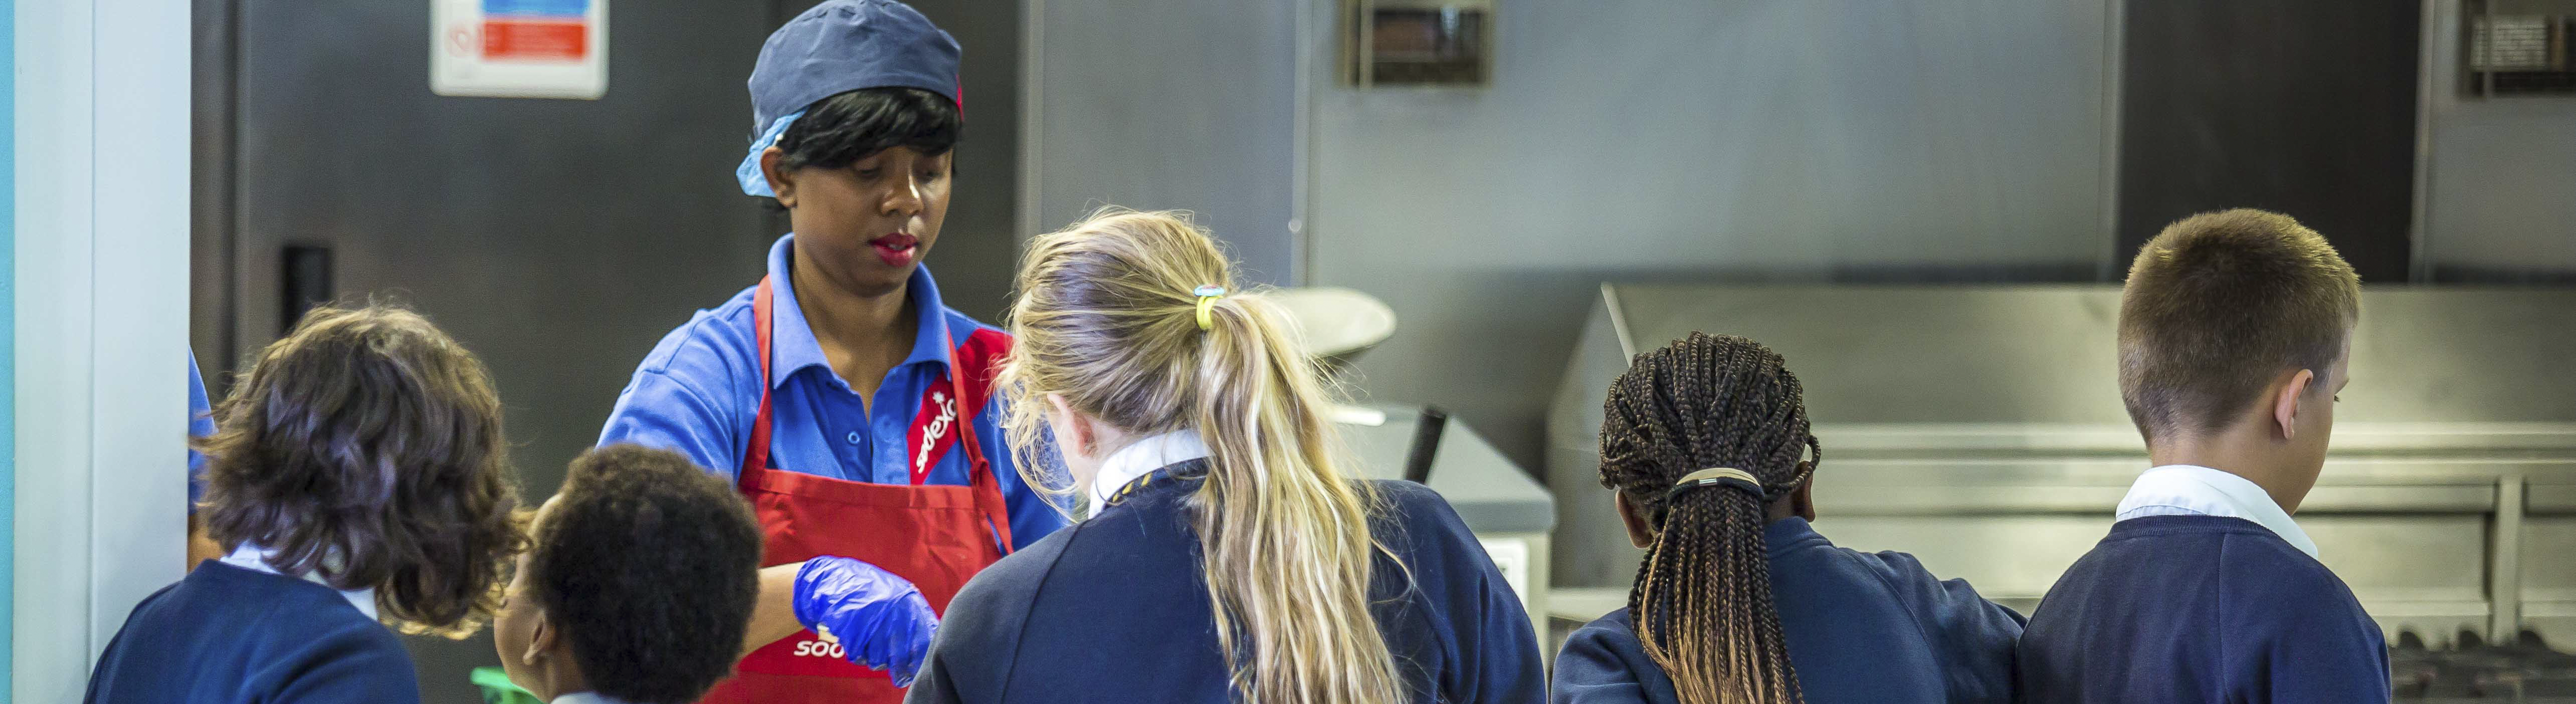 A Sodexo employee handing out food to students at the lunch counter